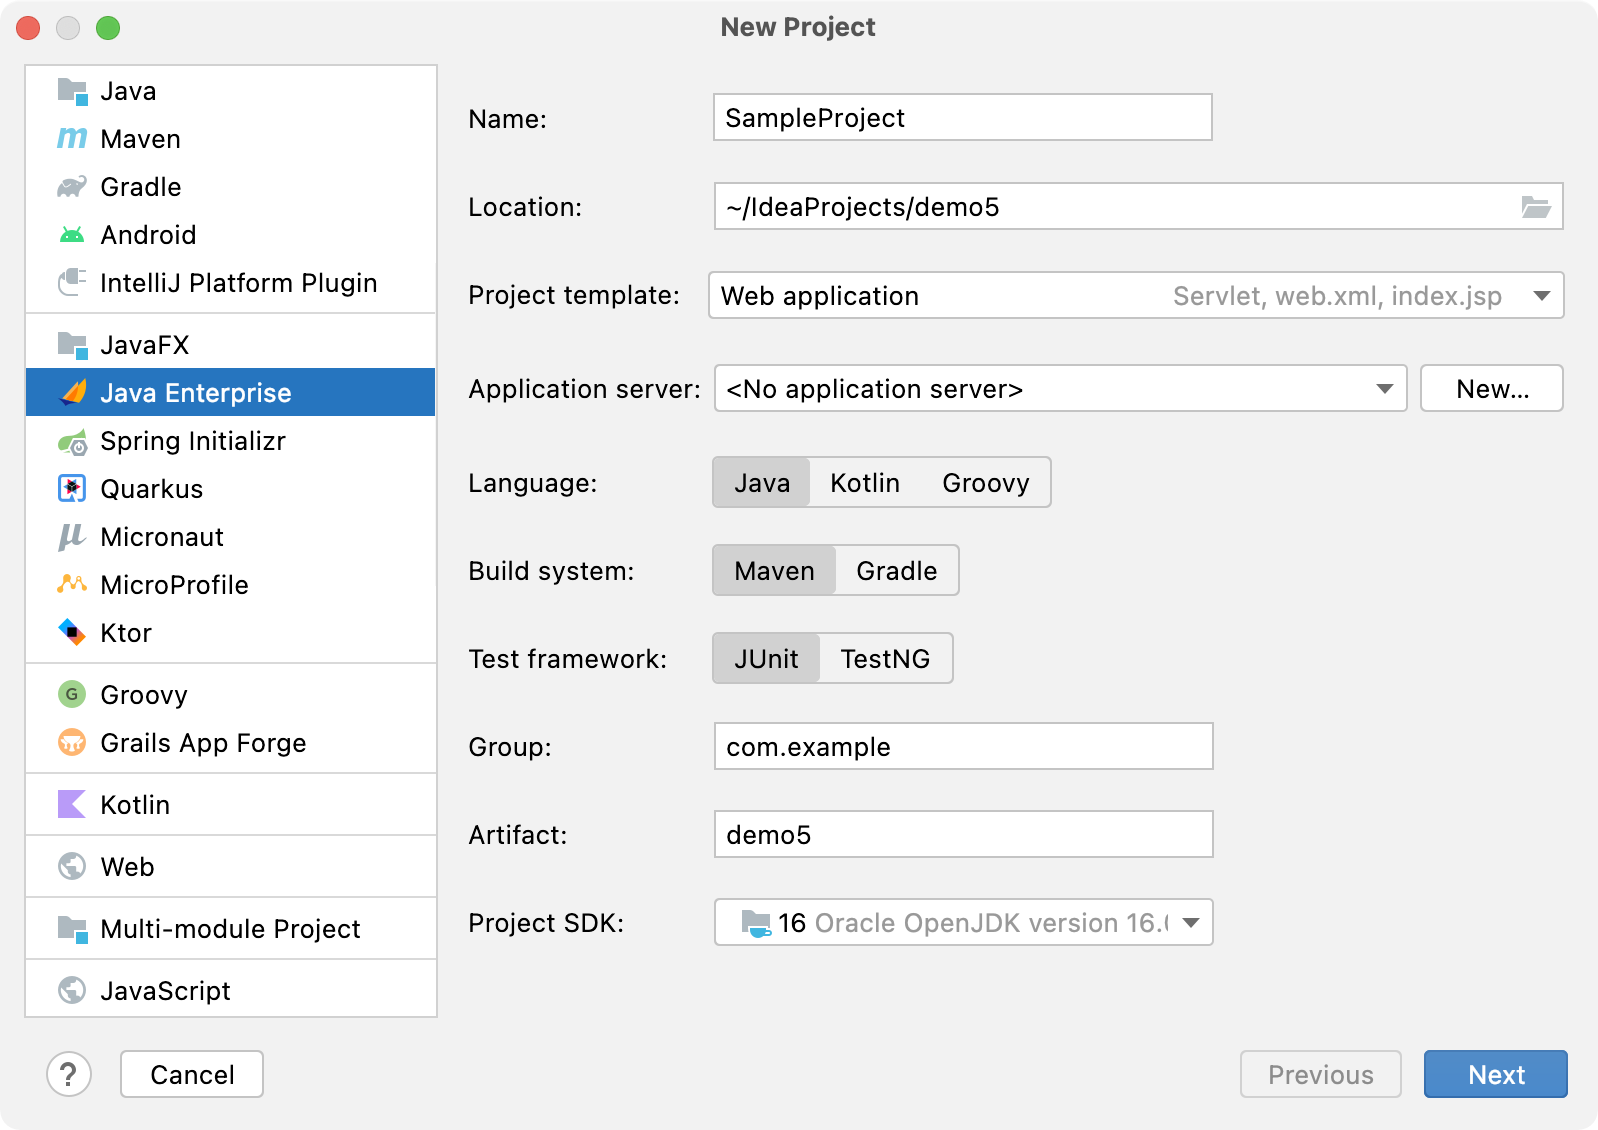 Creating new project with Hibernate support